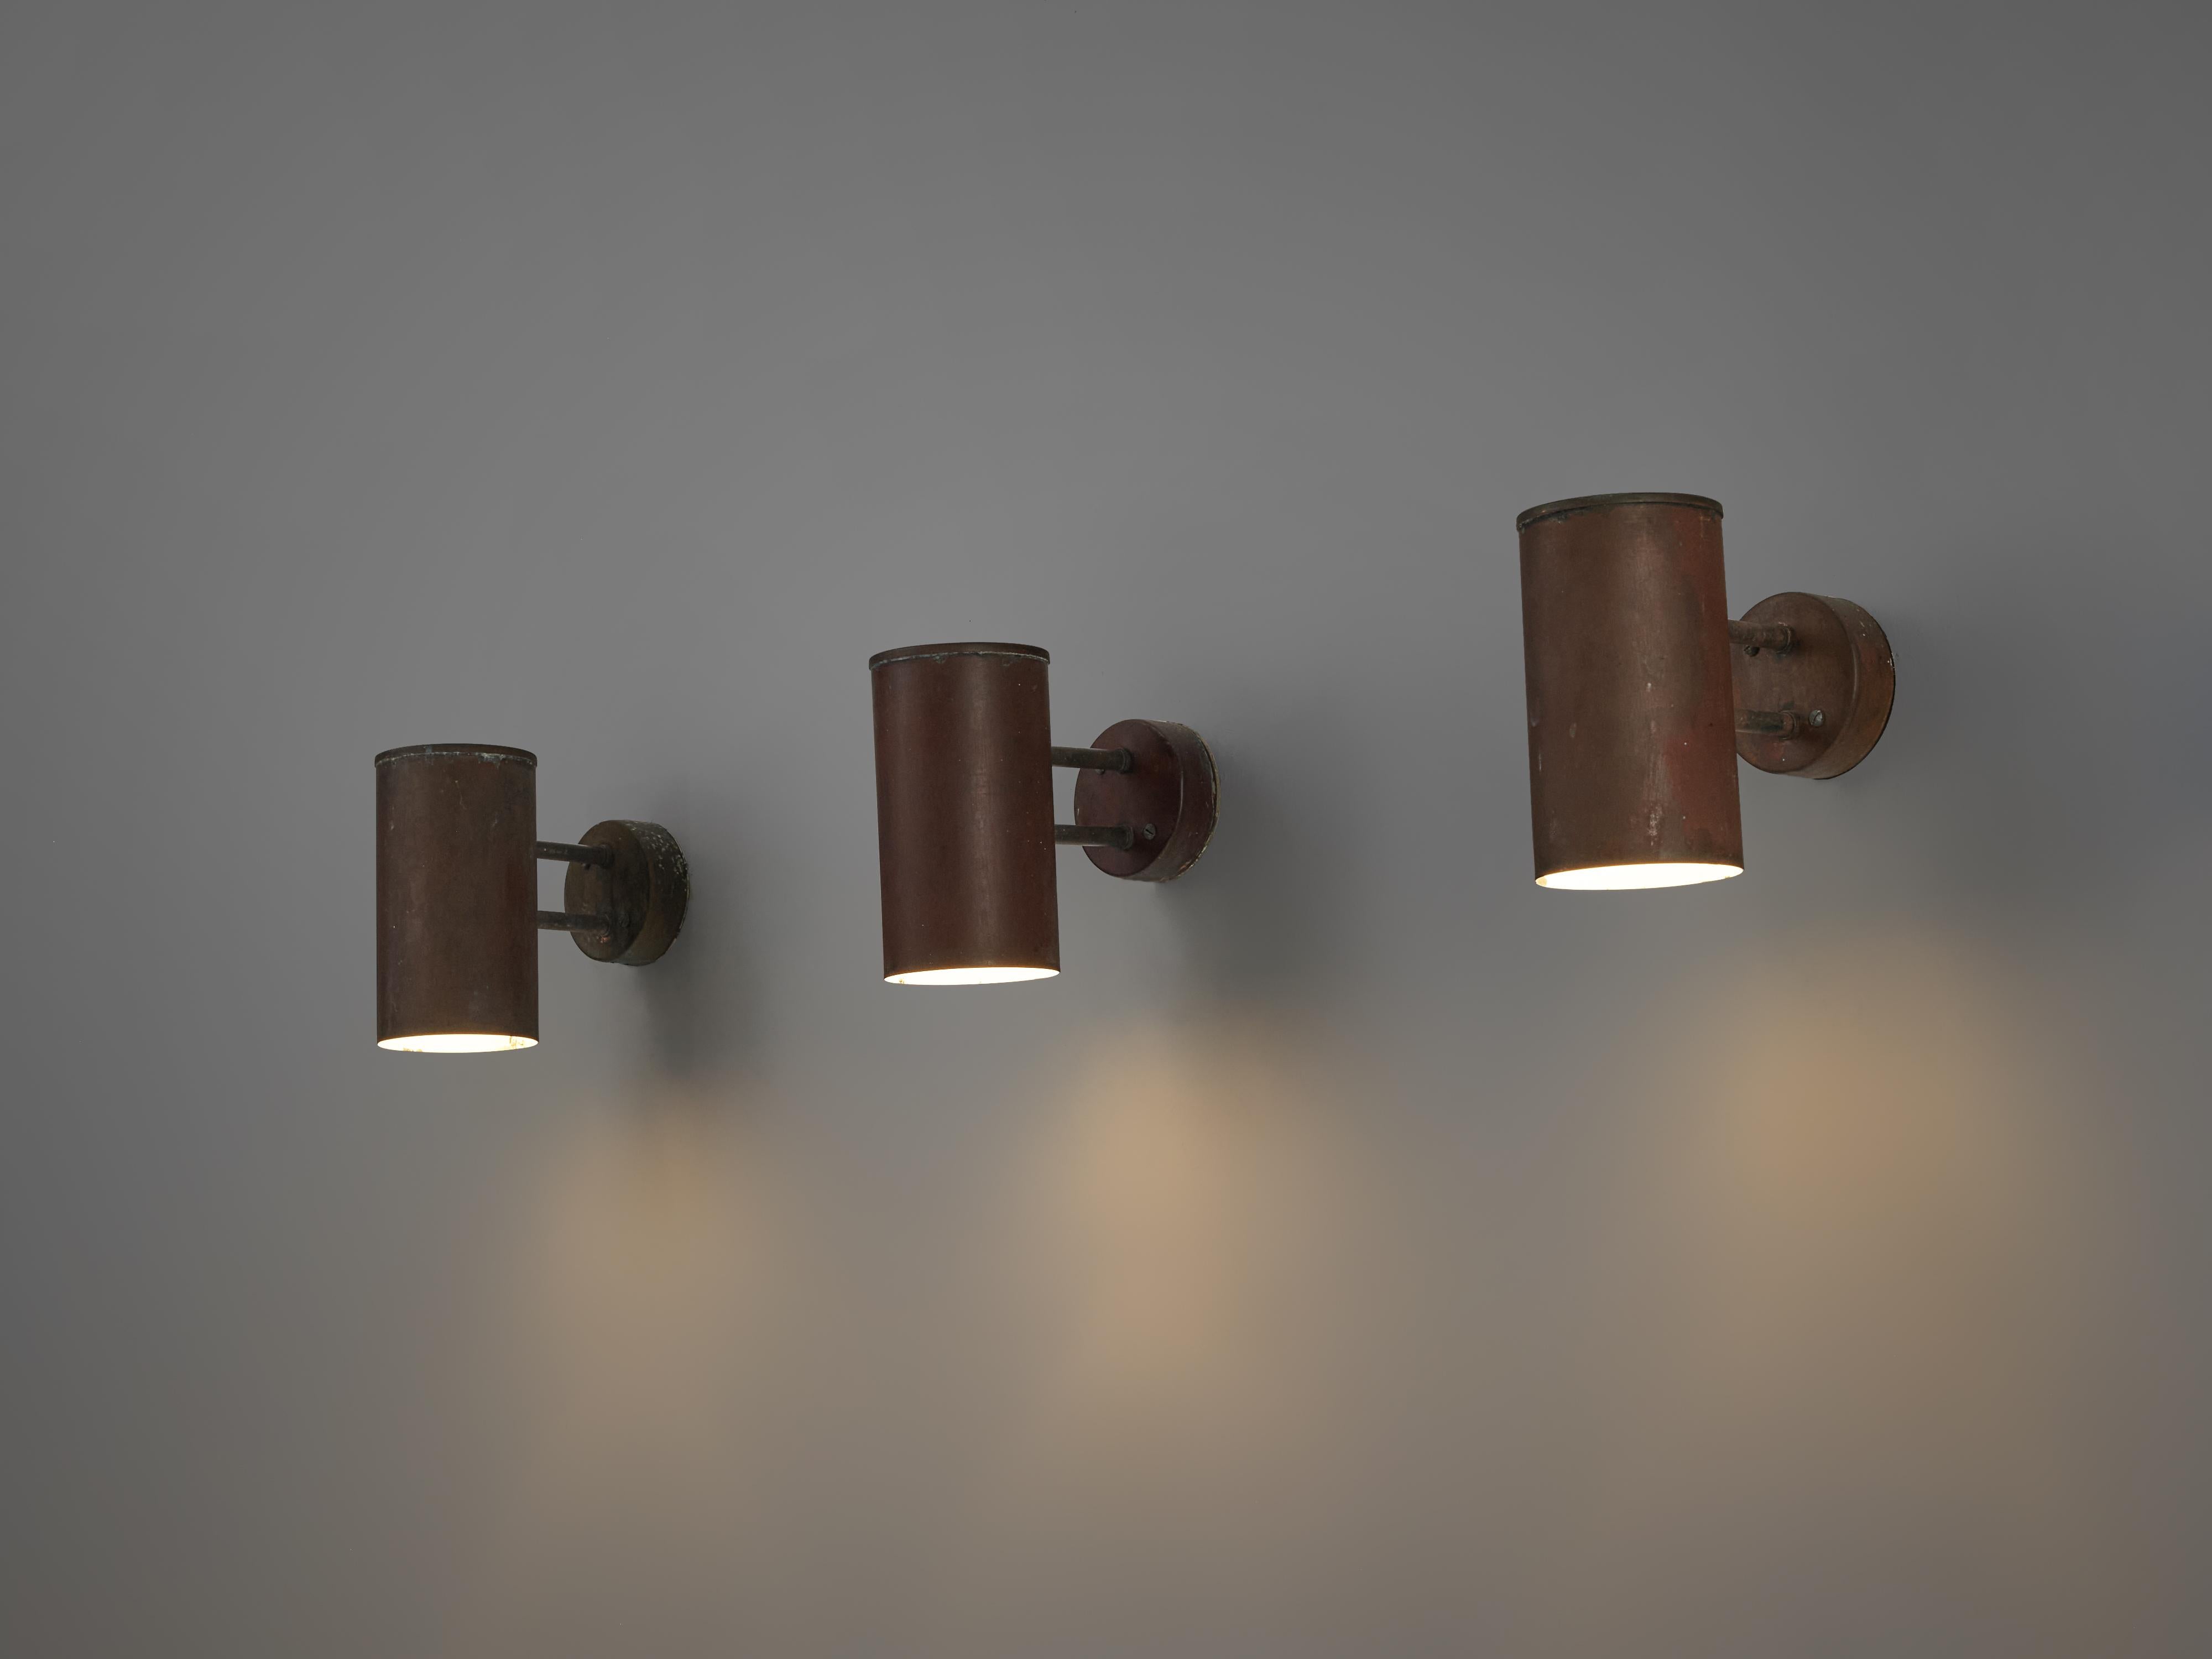 Hans-Agne Jakobsson, ‘Rulle’ wall lights, copper, Sweden, 1960s

The ‘Rulle’ outdoor lights by Swedish designer Hans-Agne Jakobsson feature a cylindric lampshade that is connected to a circular fixation. The way the rich patina structures the